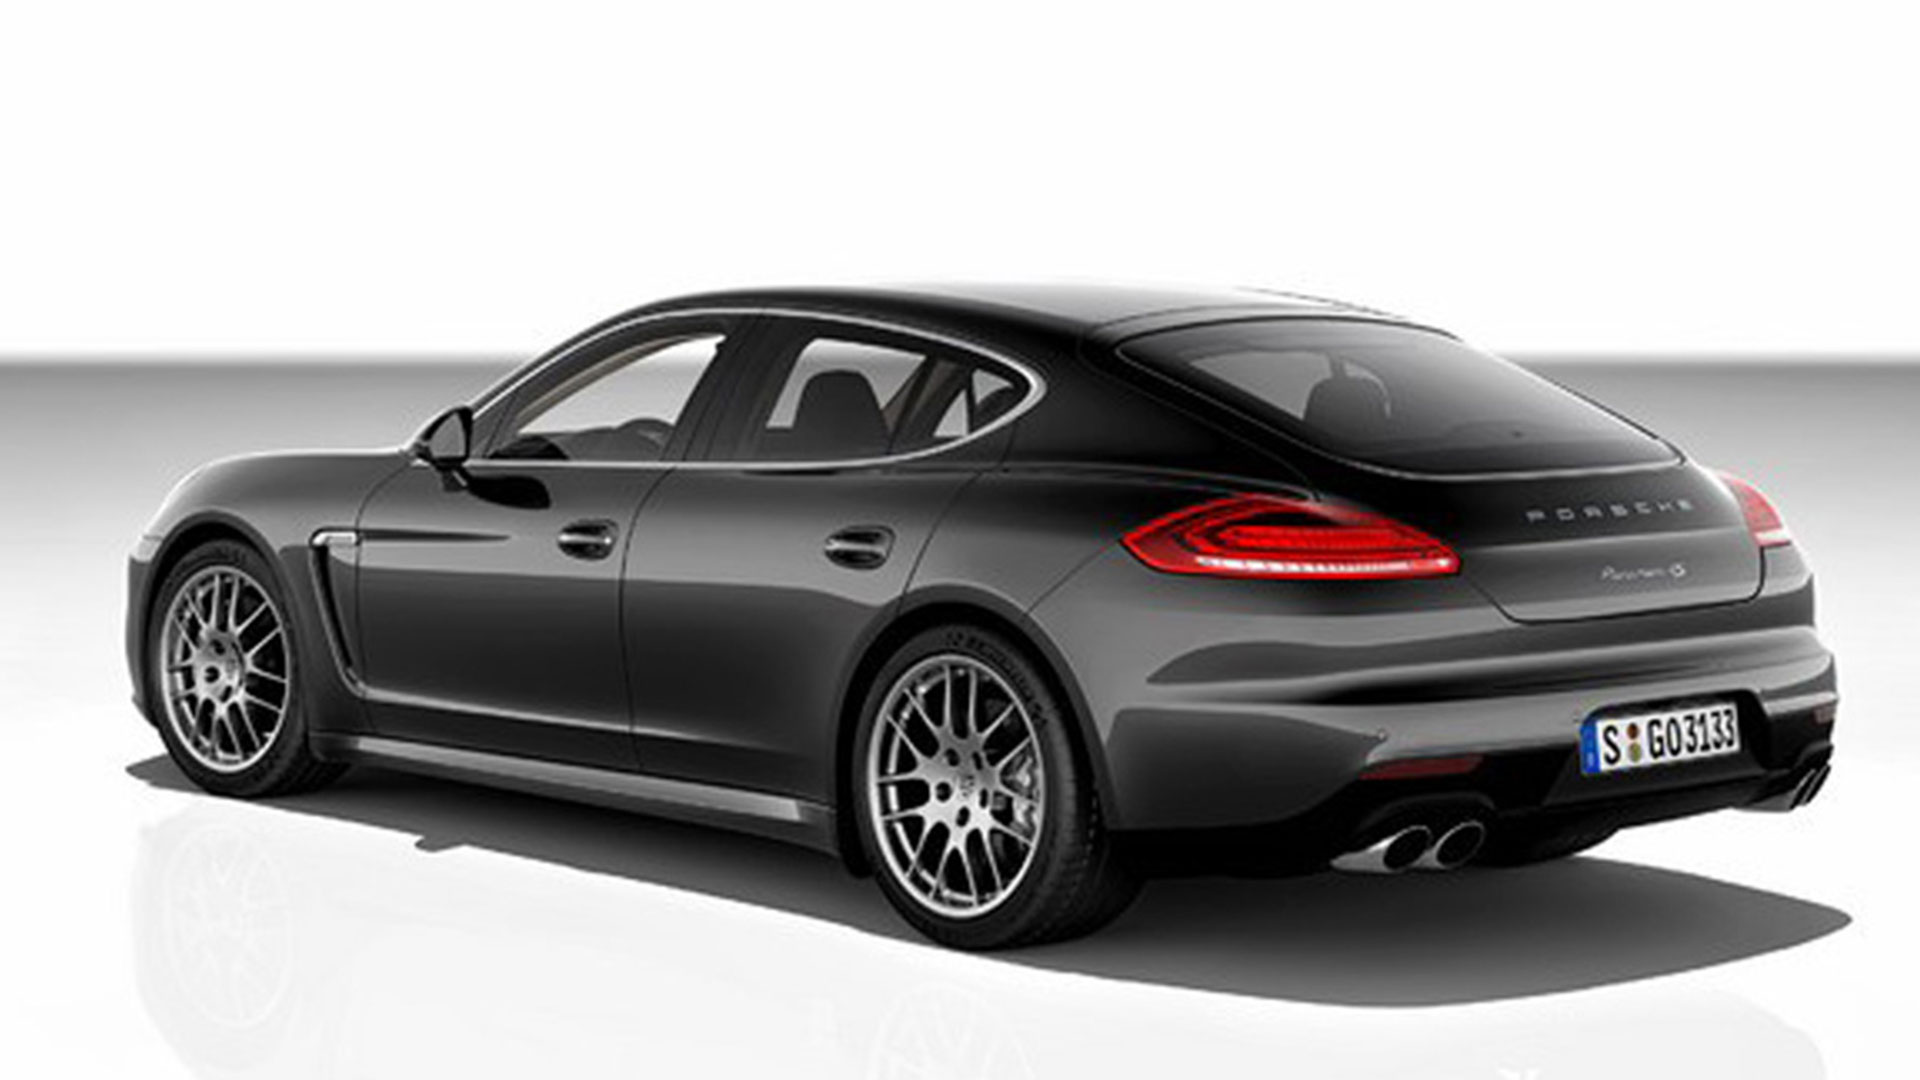 Porsche Panamera 2015 Price, Review, Specification, Release Date